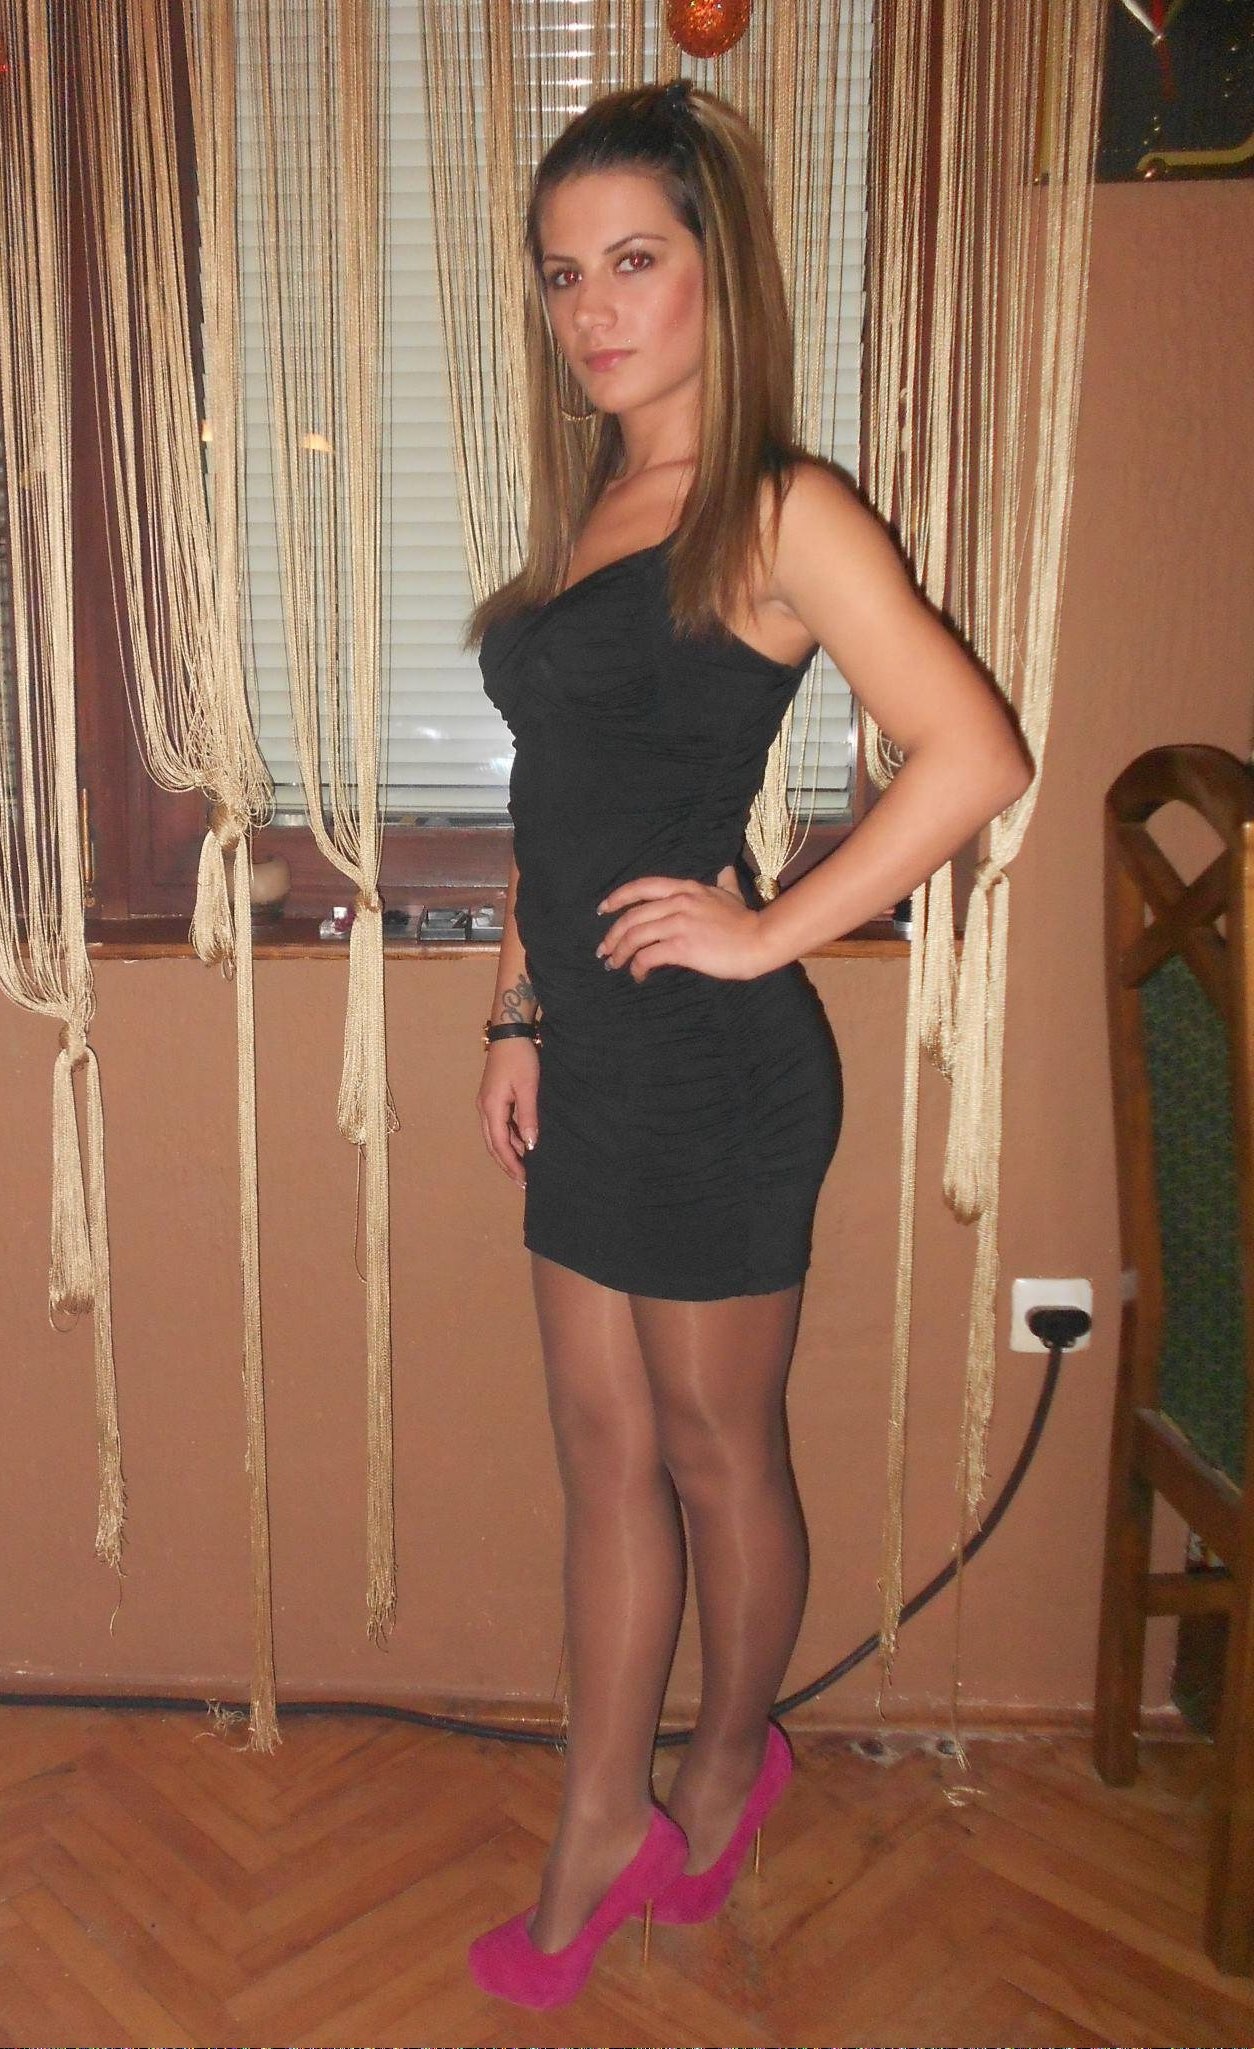 Another Amateur Pics Of Girls In Tight Dresses T I G H Tcom